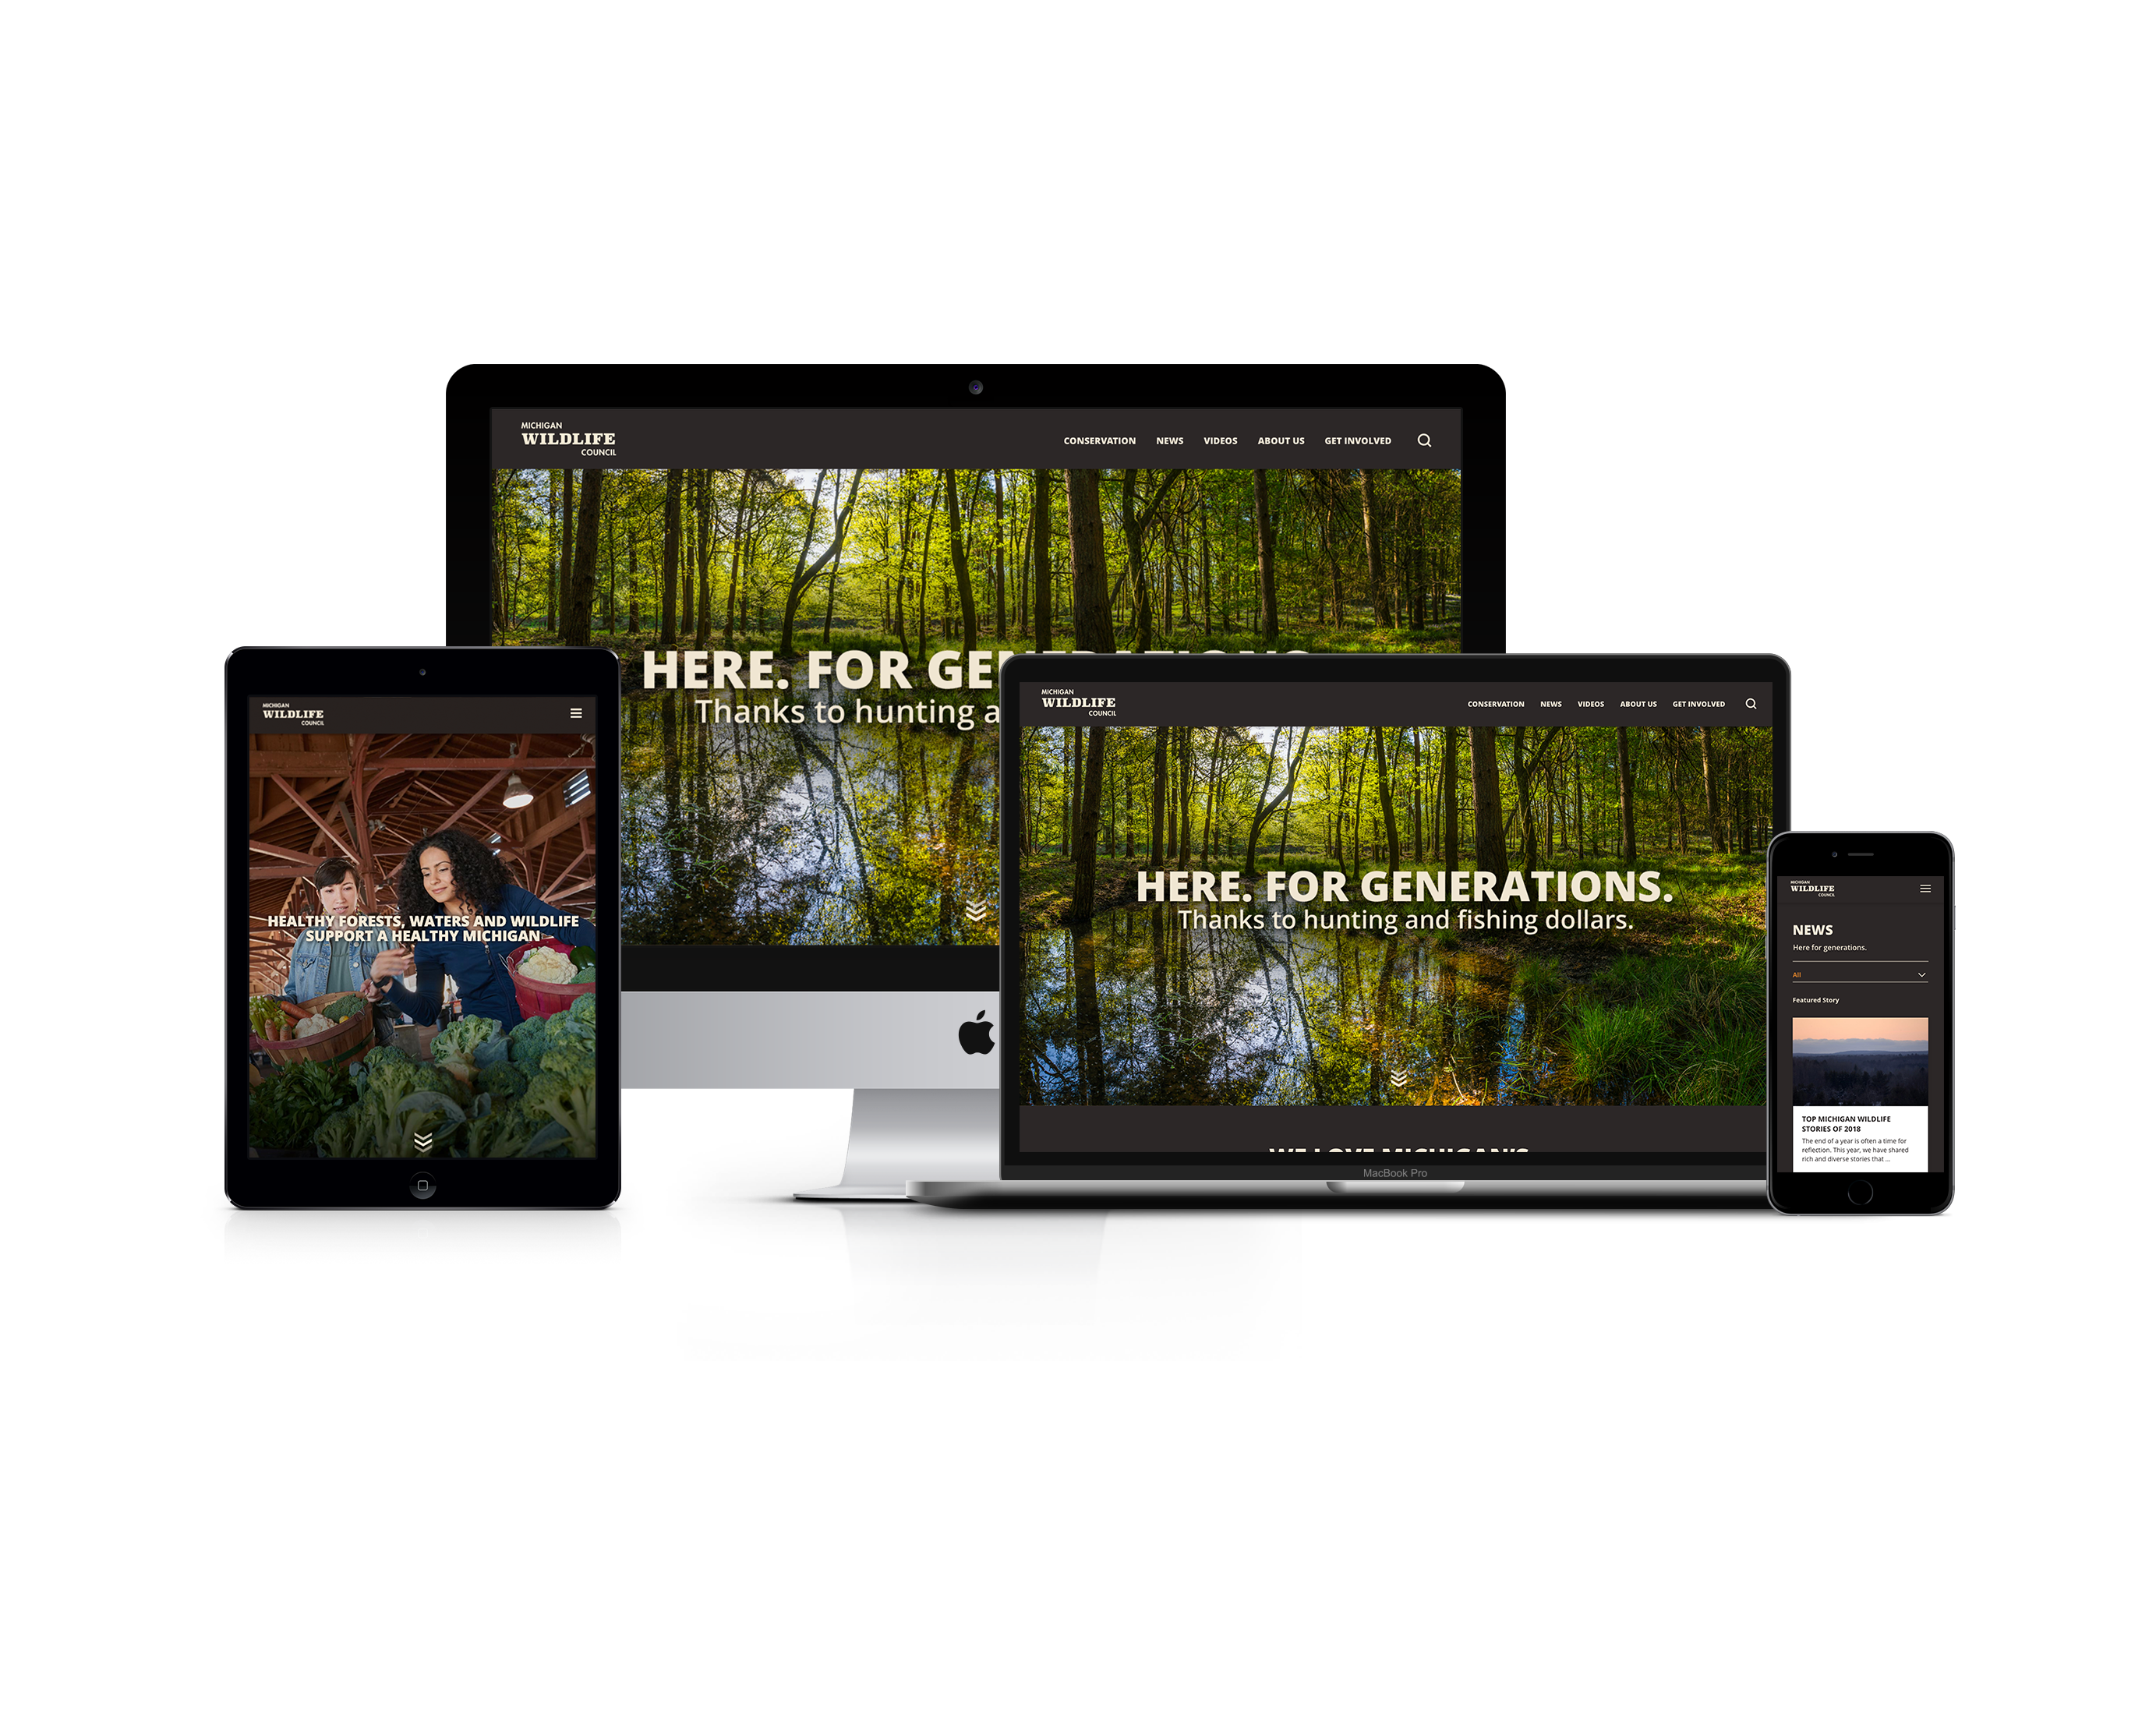 An image of the Michigan Wildlife Council website mocked up in a tablet, desktop, laptop and mobile photo.